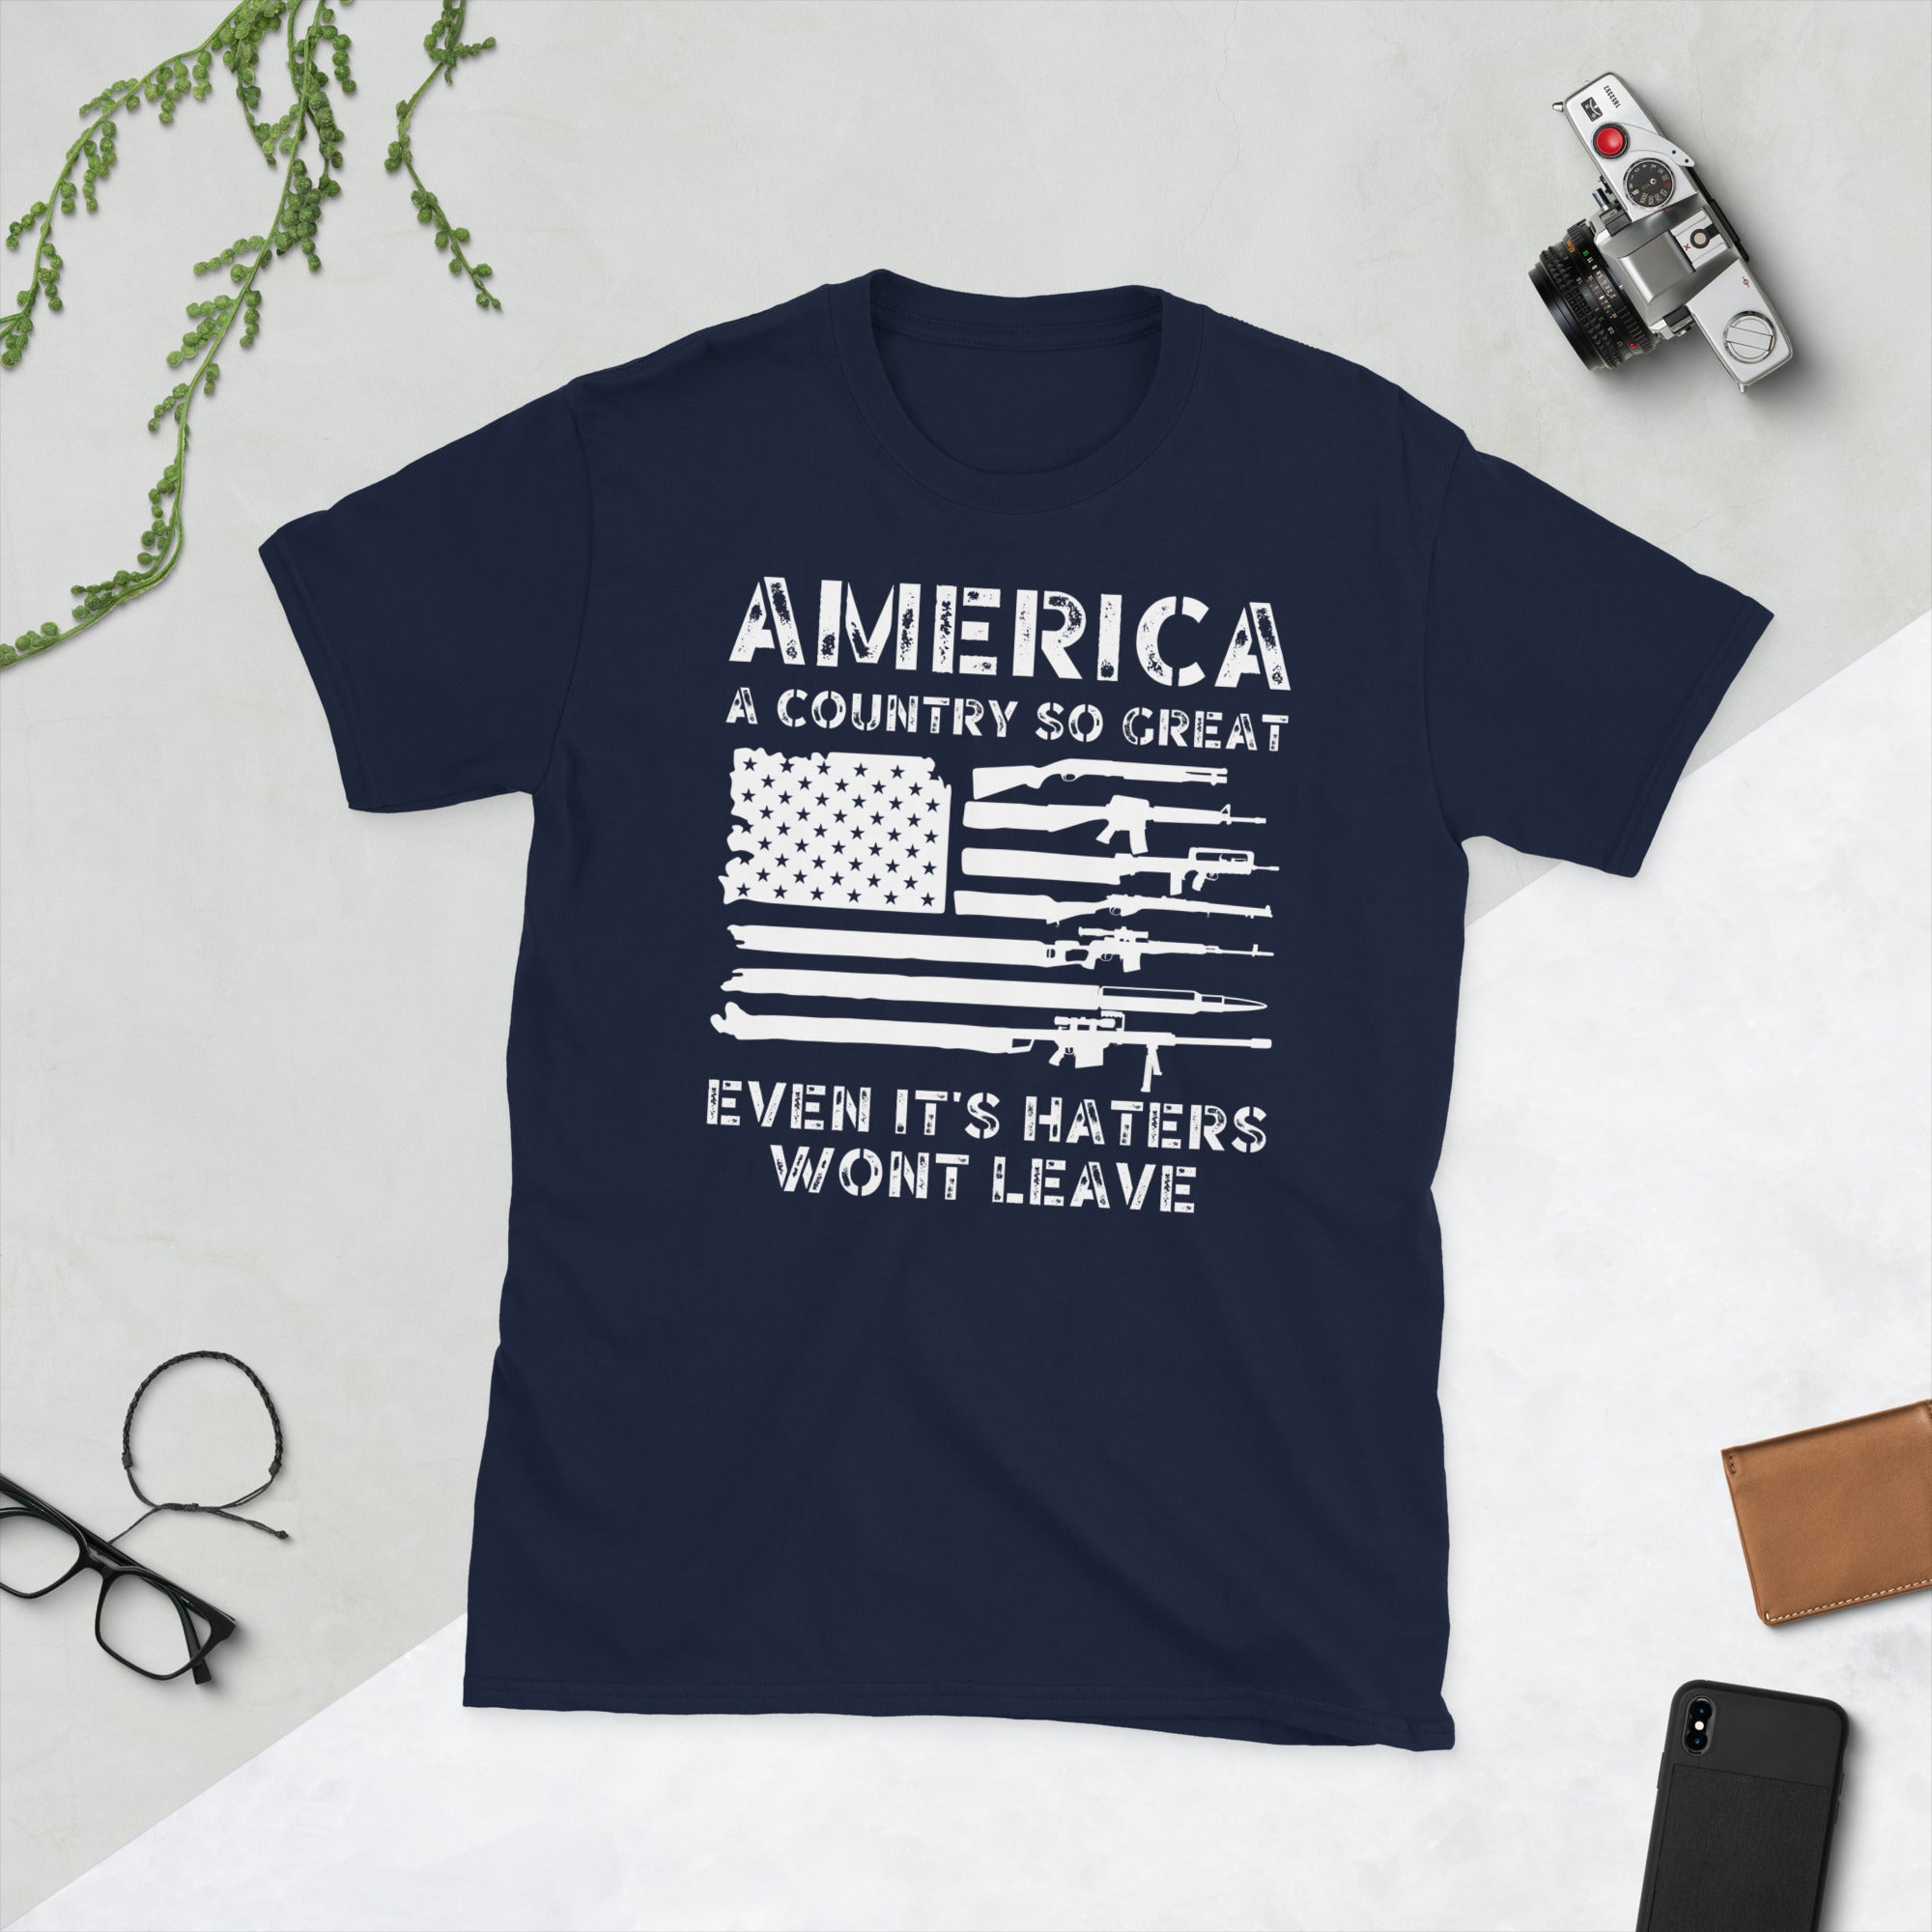 America A Country So Great Even Its Haters Wont Leave Funny 4th Of July Shirt, USA T-Shirt, Girl US Flag Tee, Independence Day, Patriot Gift - Madeinsea©